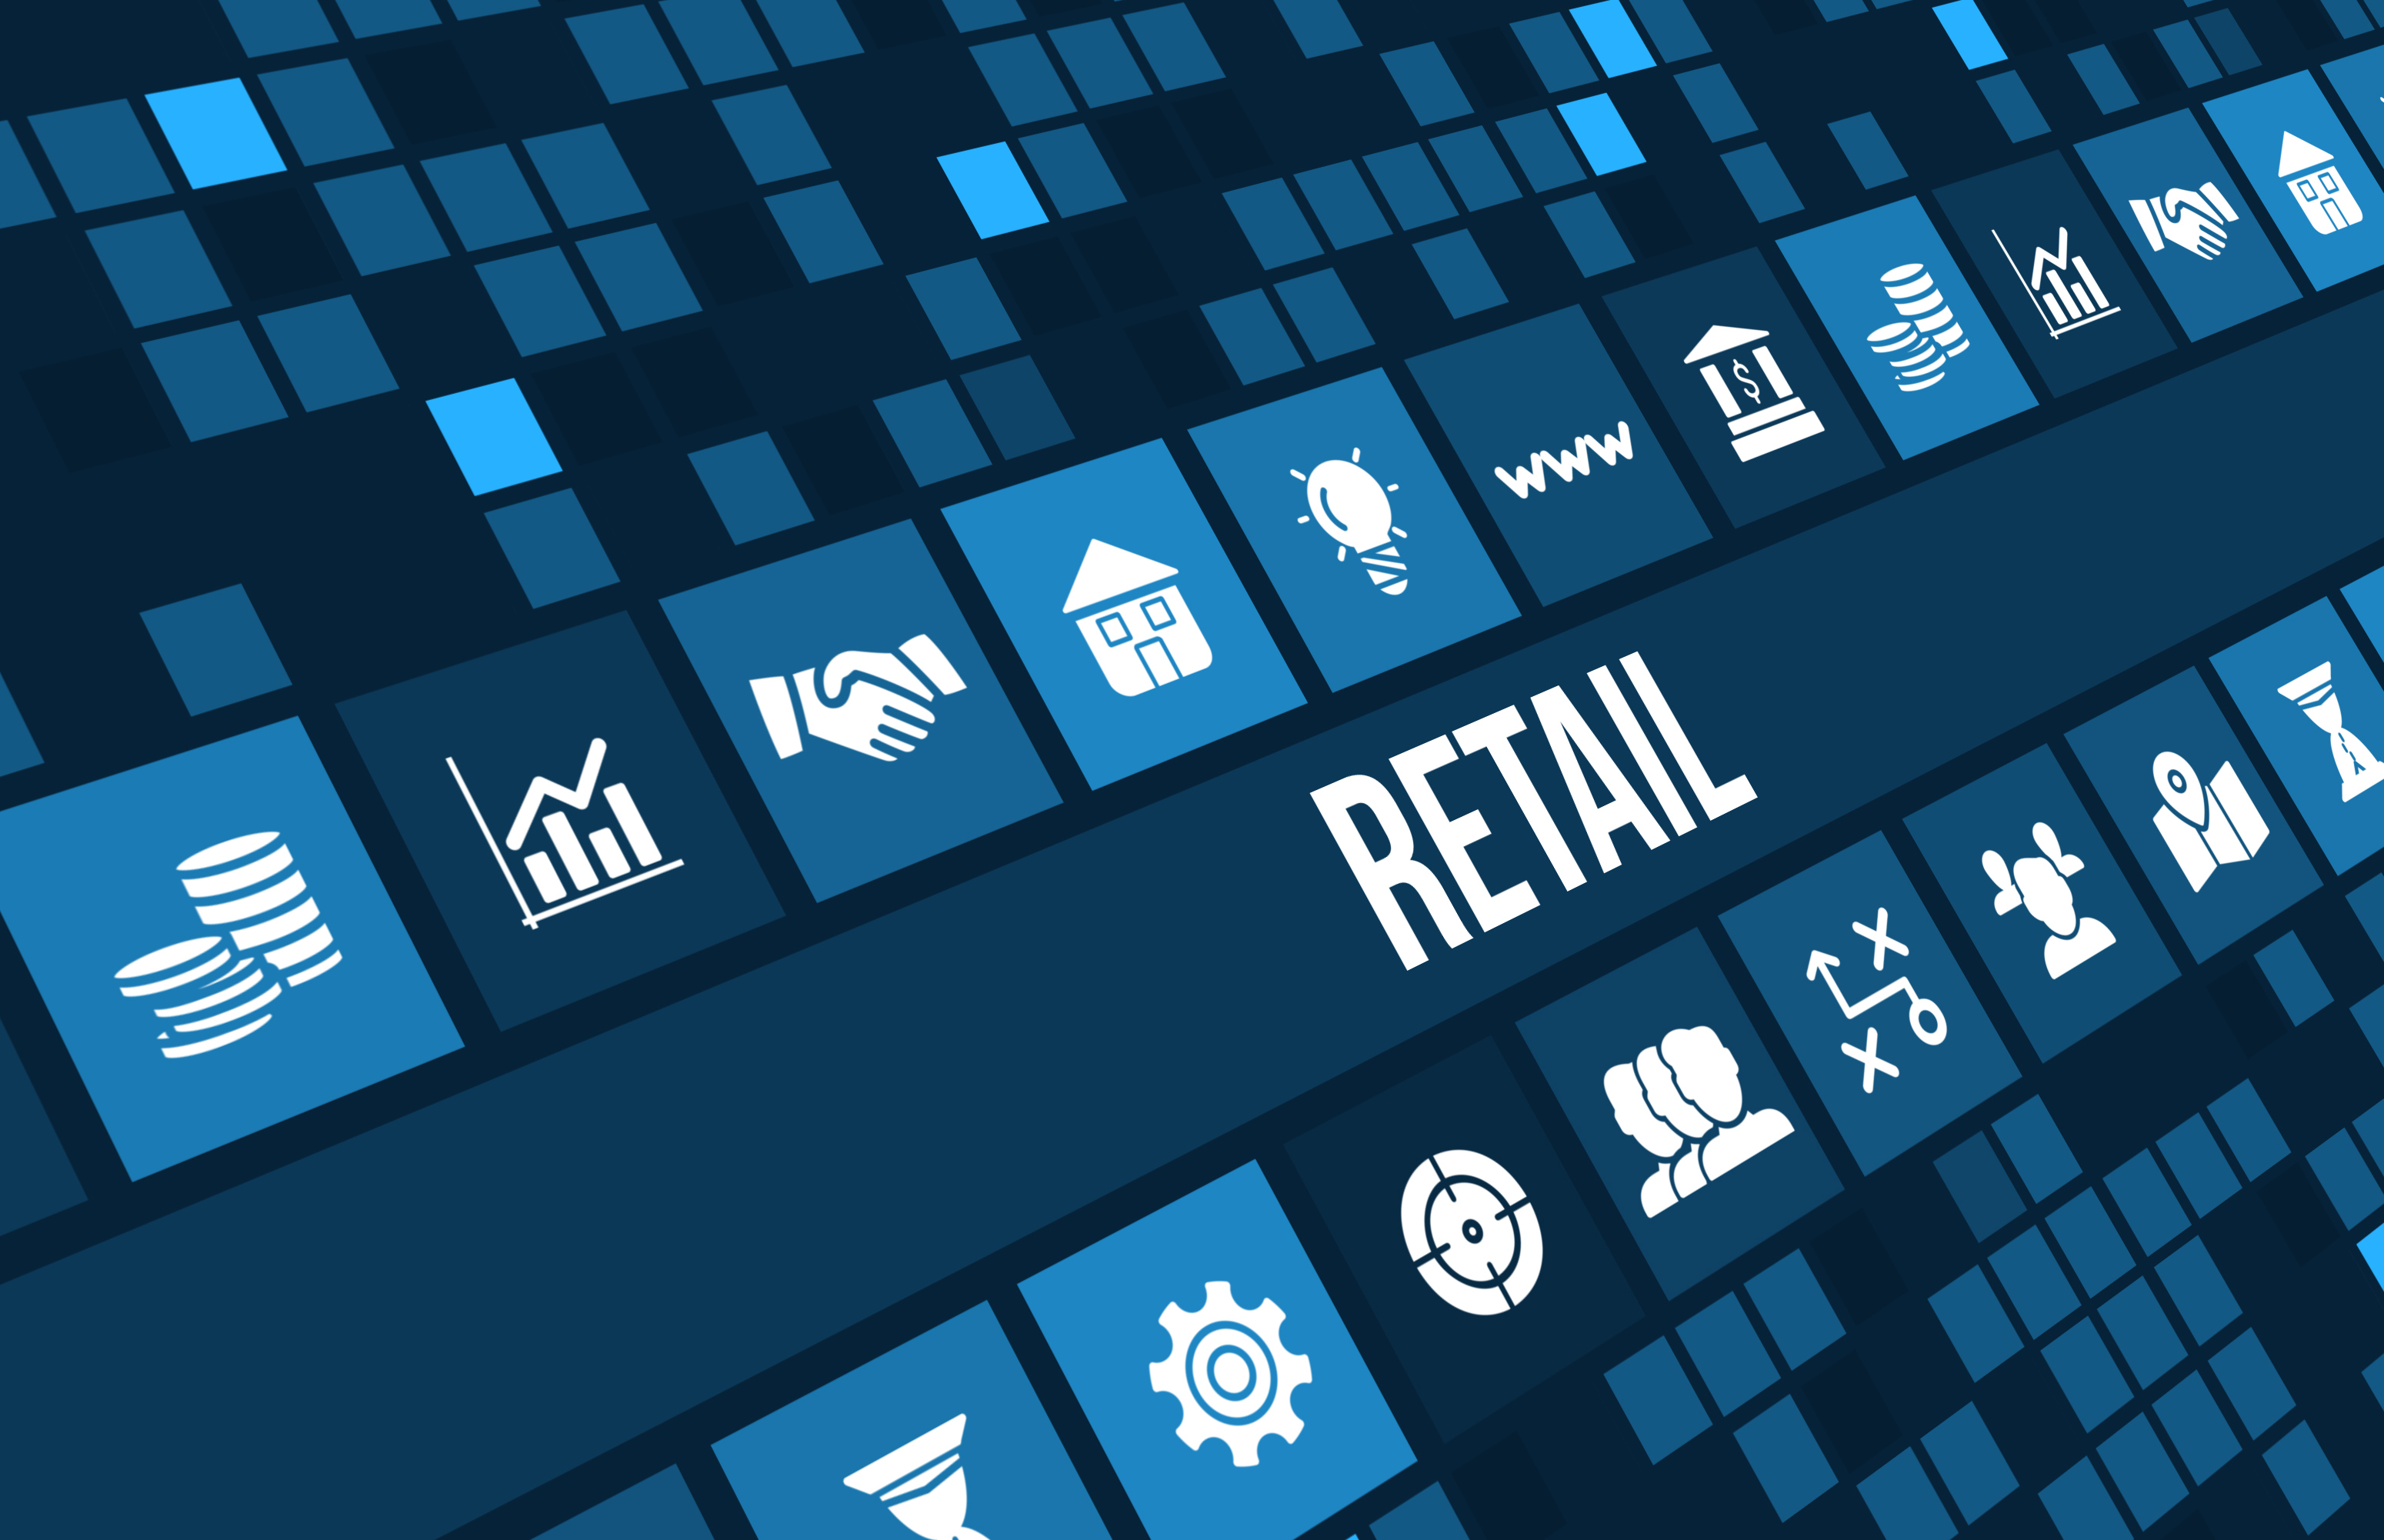 Retail concept image with business icons and copyspace.